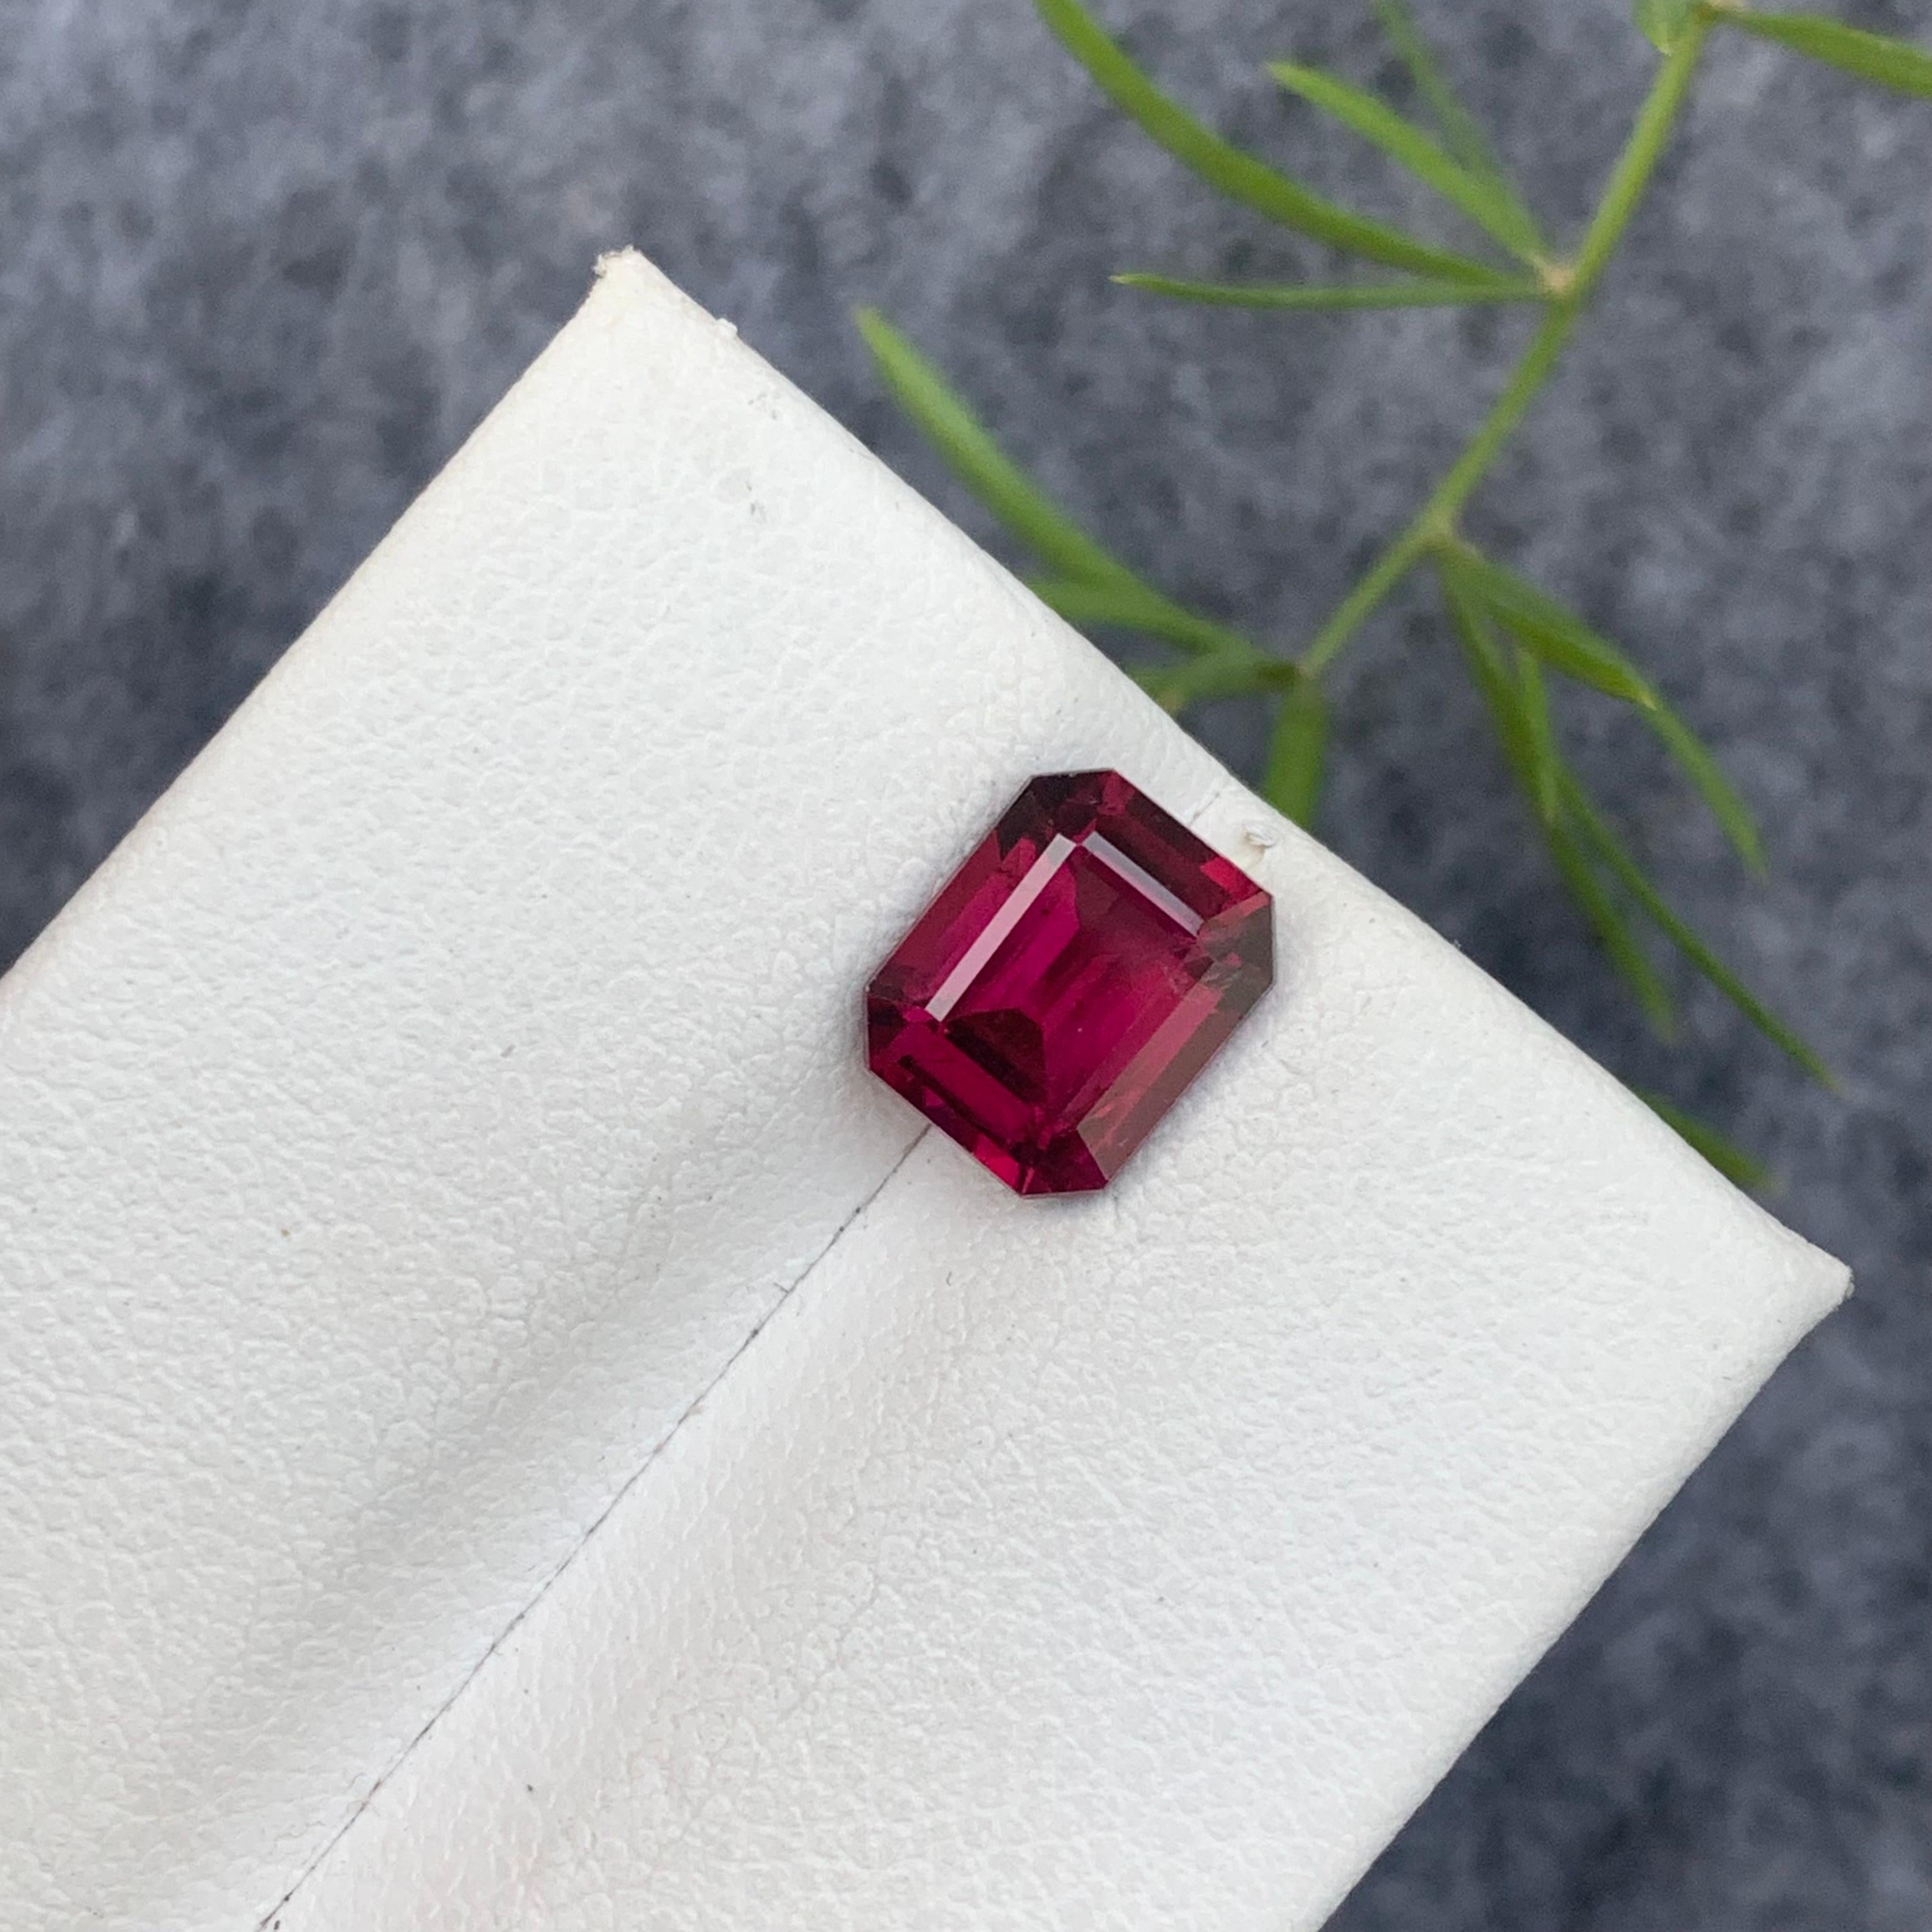 Loose Rhodolite Garnet
Weight : 2.10 Carats
Dimensions : 7.9x6.4x4.2 Mm
Origin : Tanzania Africa
Clarity : AAA Eye Clean
Shape: Emerald Shape
Certificate: On Demand
Treatment: Non
Color: Red
.
Rhodolite is a mixture of pyrope and almandite garnets.